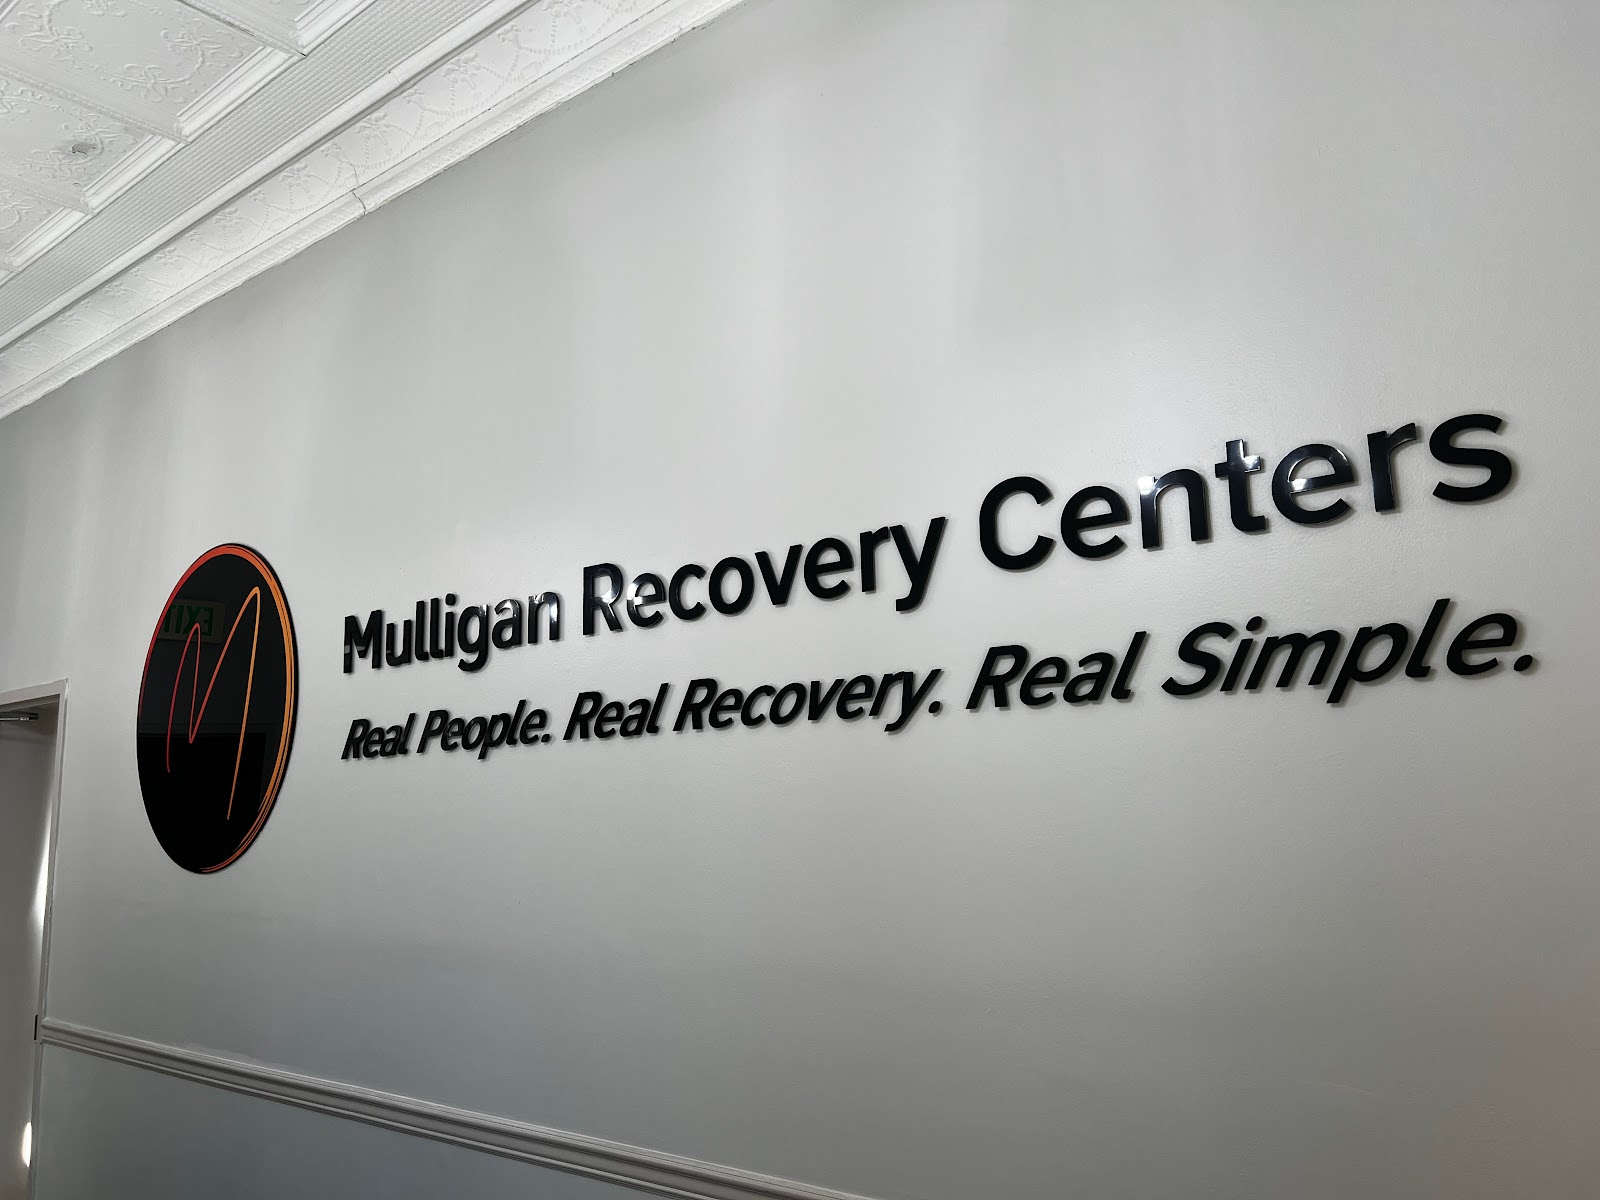 Mulligan Recovery Centers